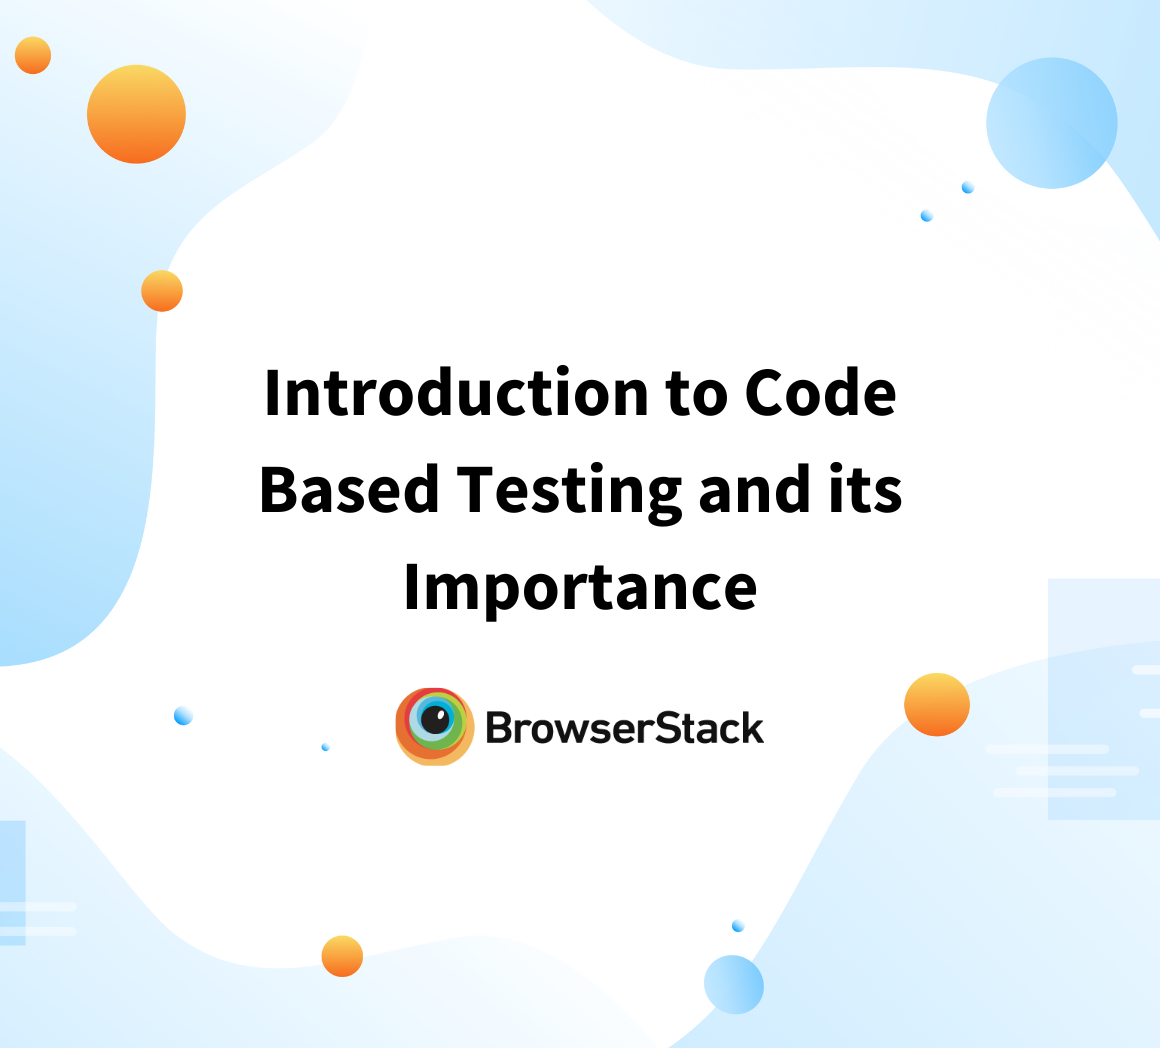 Introduction to Code Based Testing and its Importance